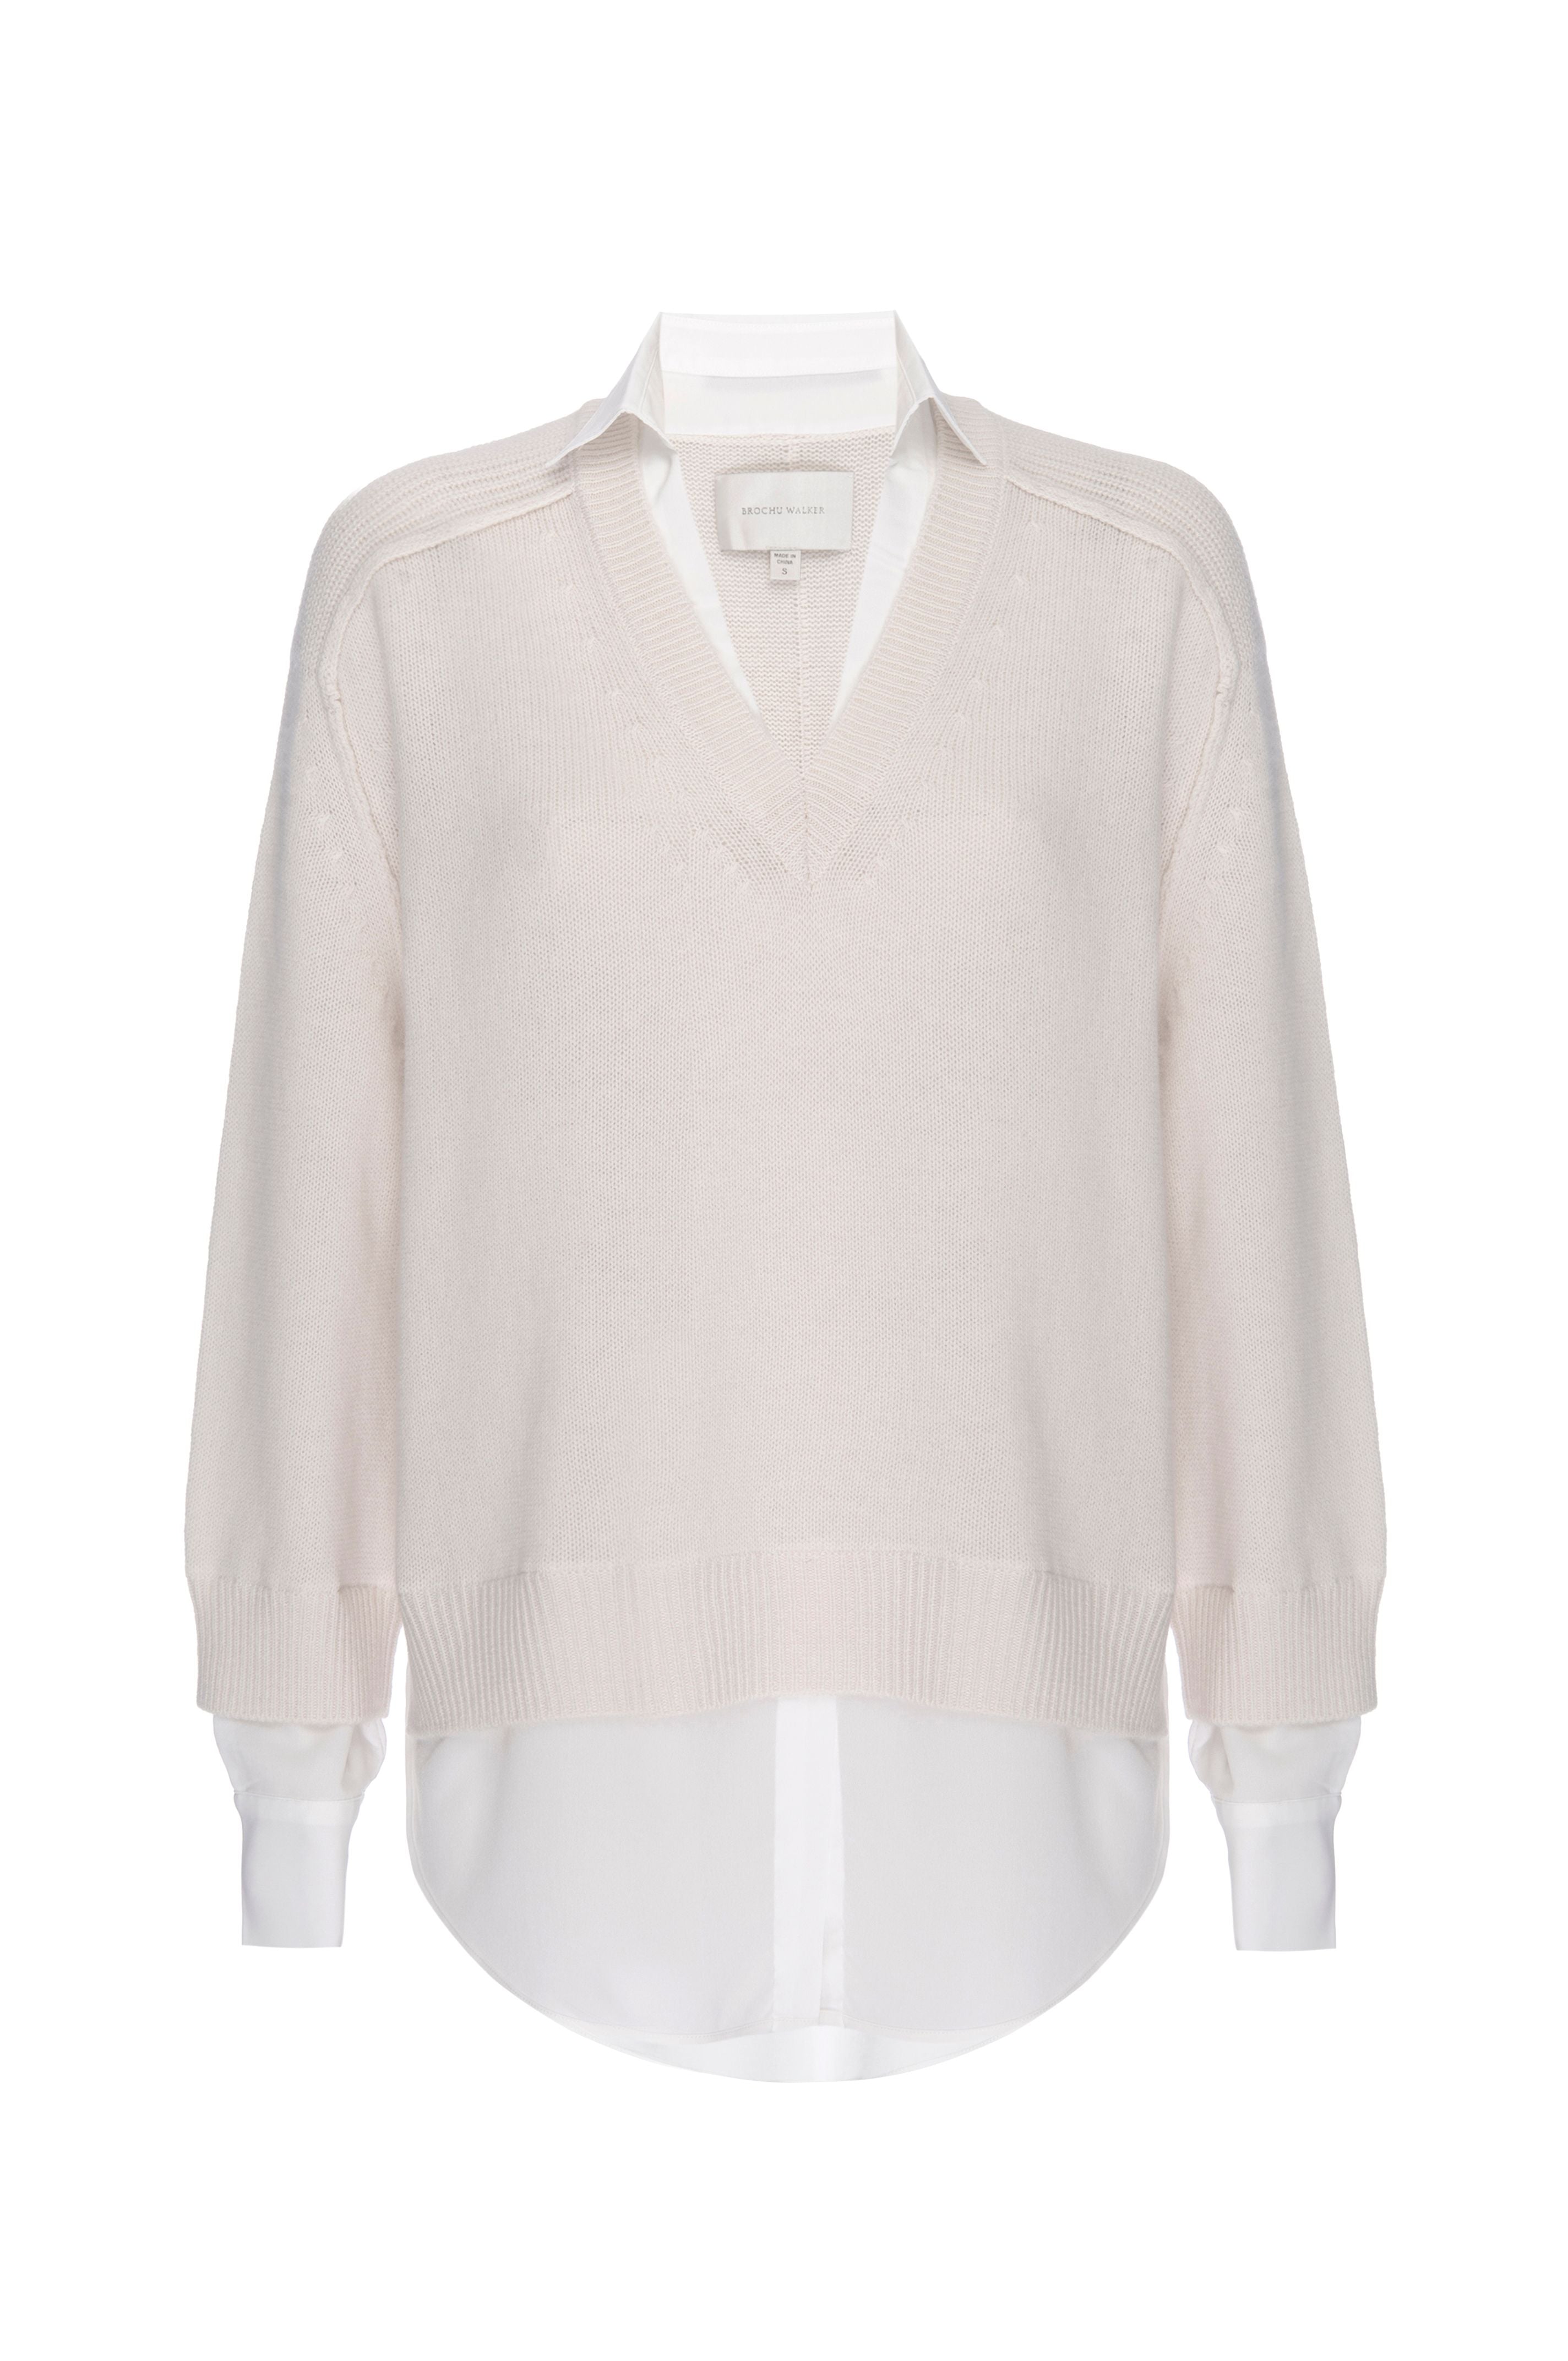 Looker ivory layered v-neck sweater flat view